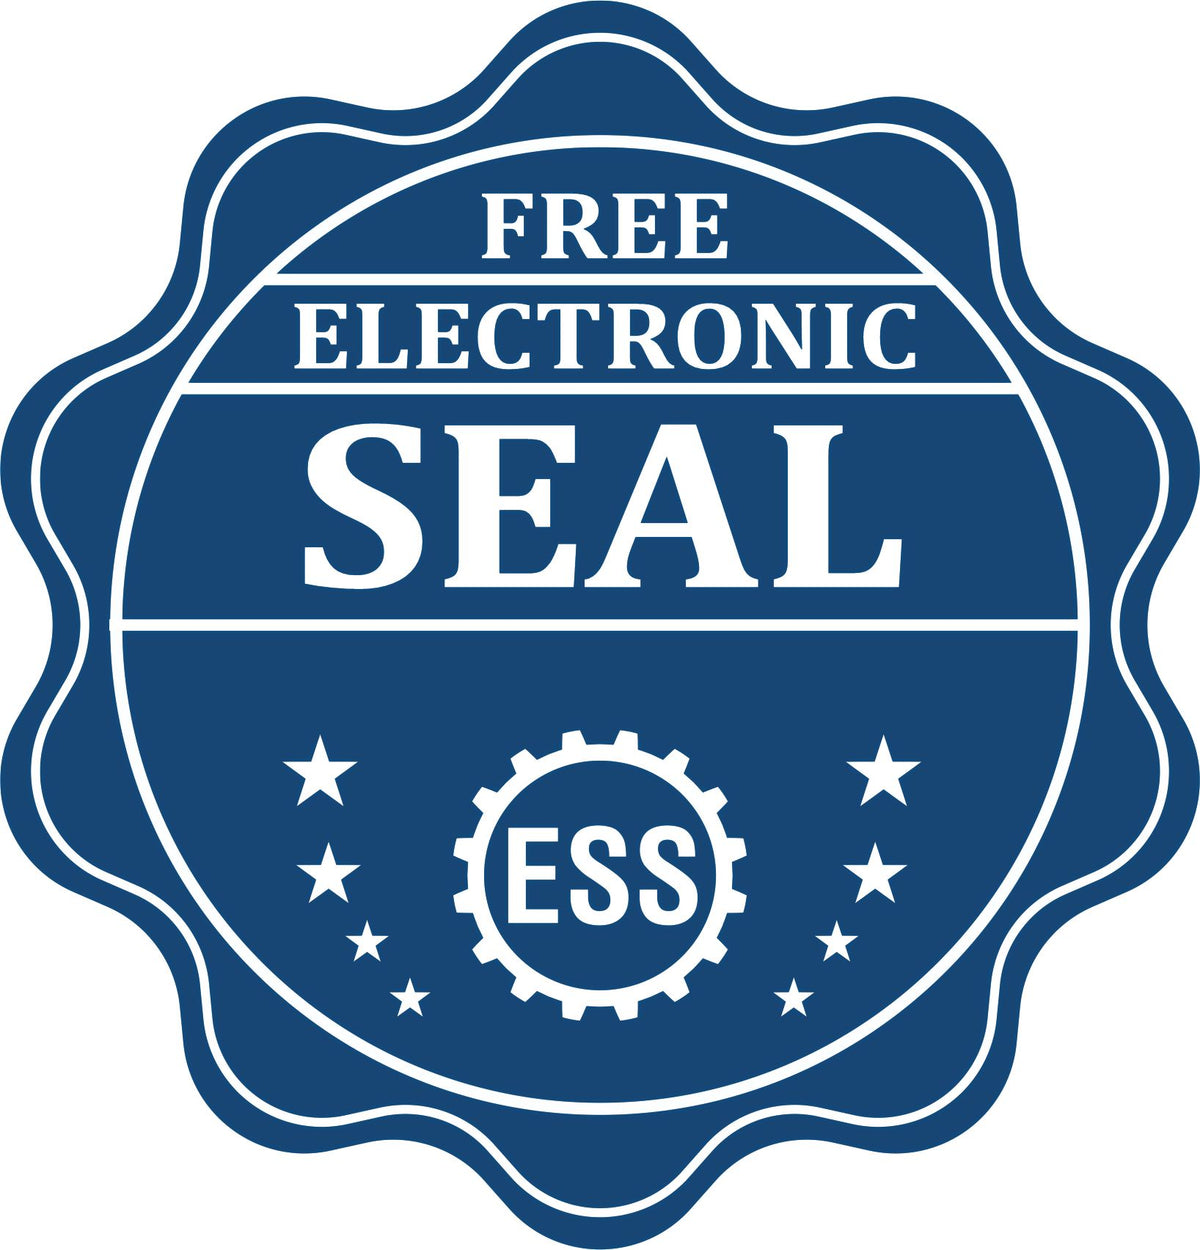 A badge showing a free electronic seal for the Long Reach South Carolina PE Seal with stars and the ESS gear on the emblem.